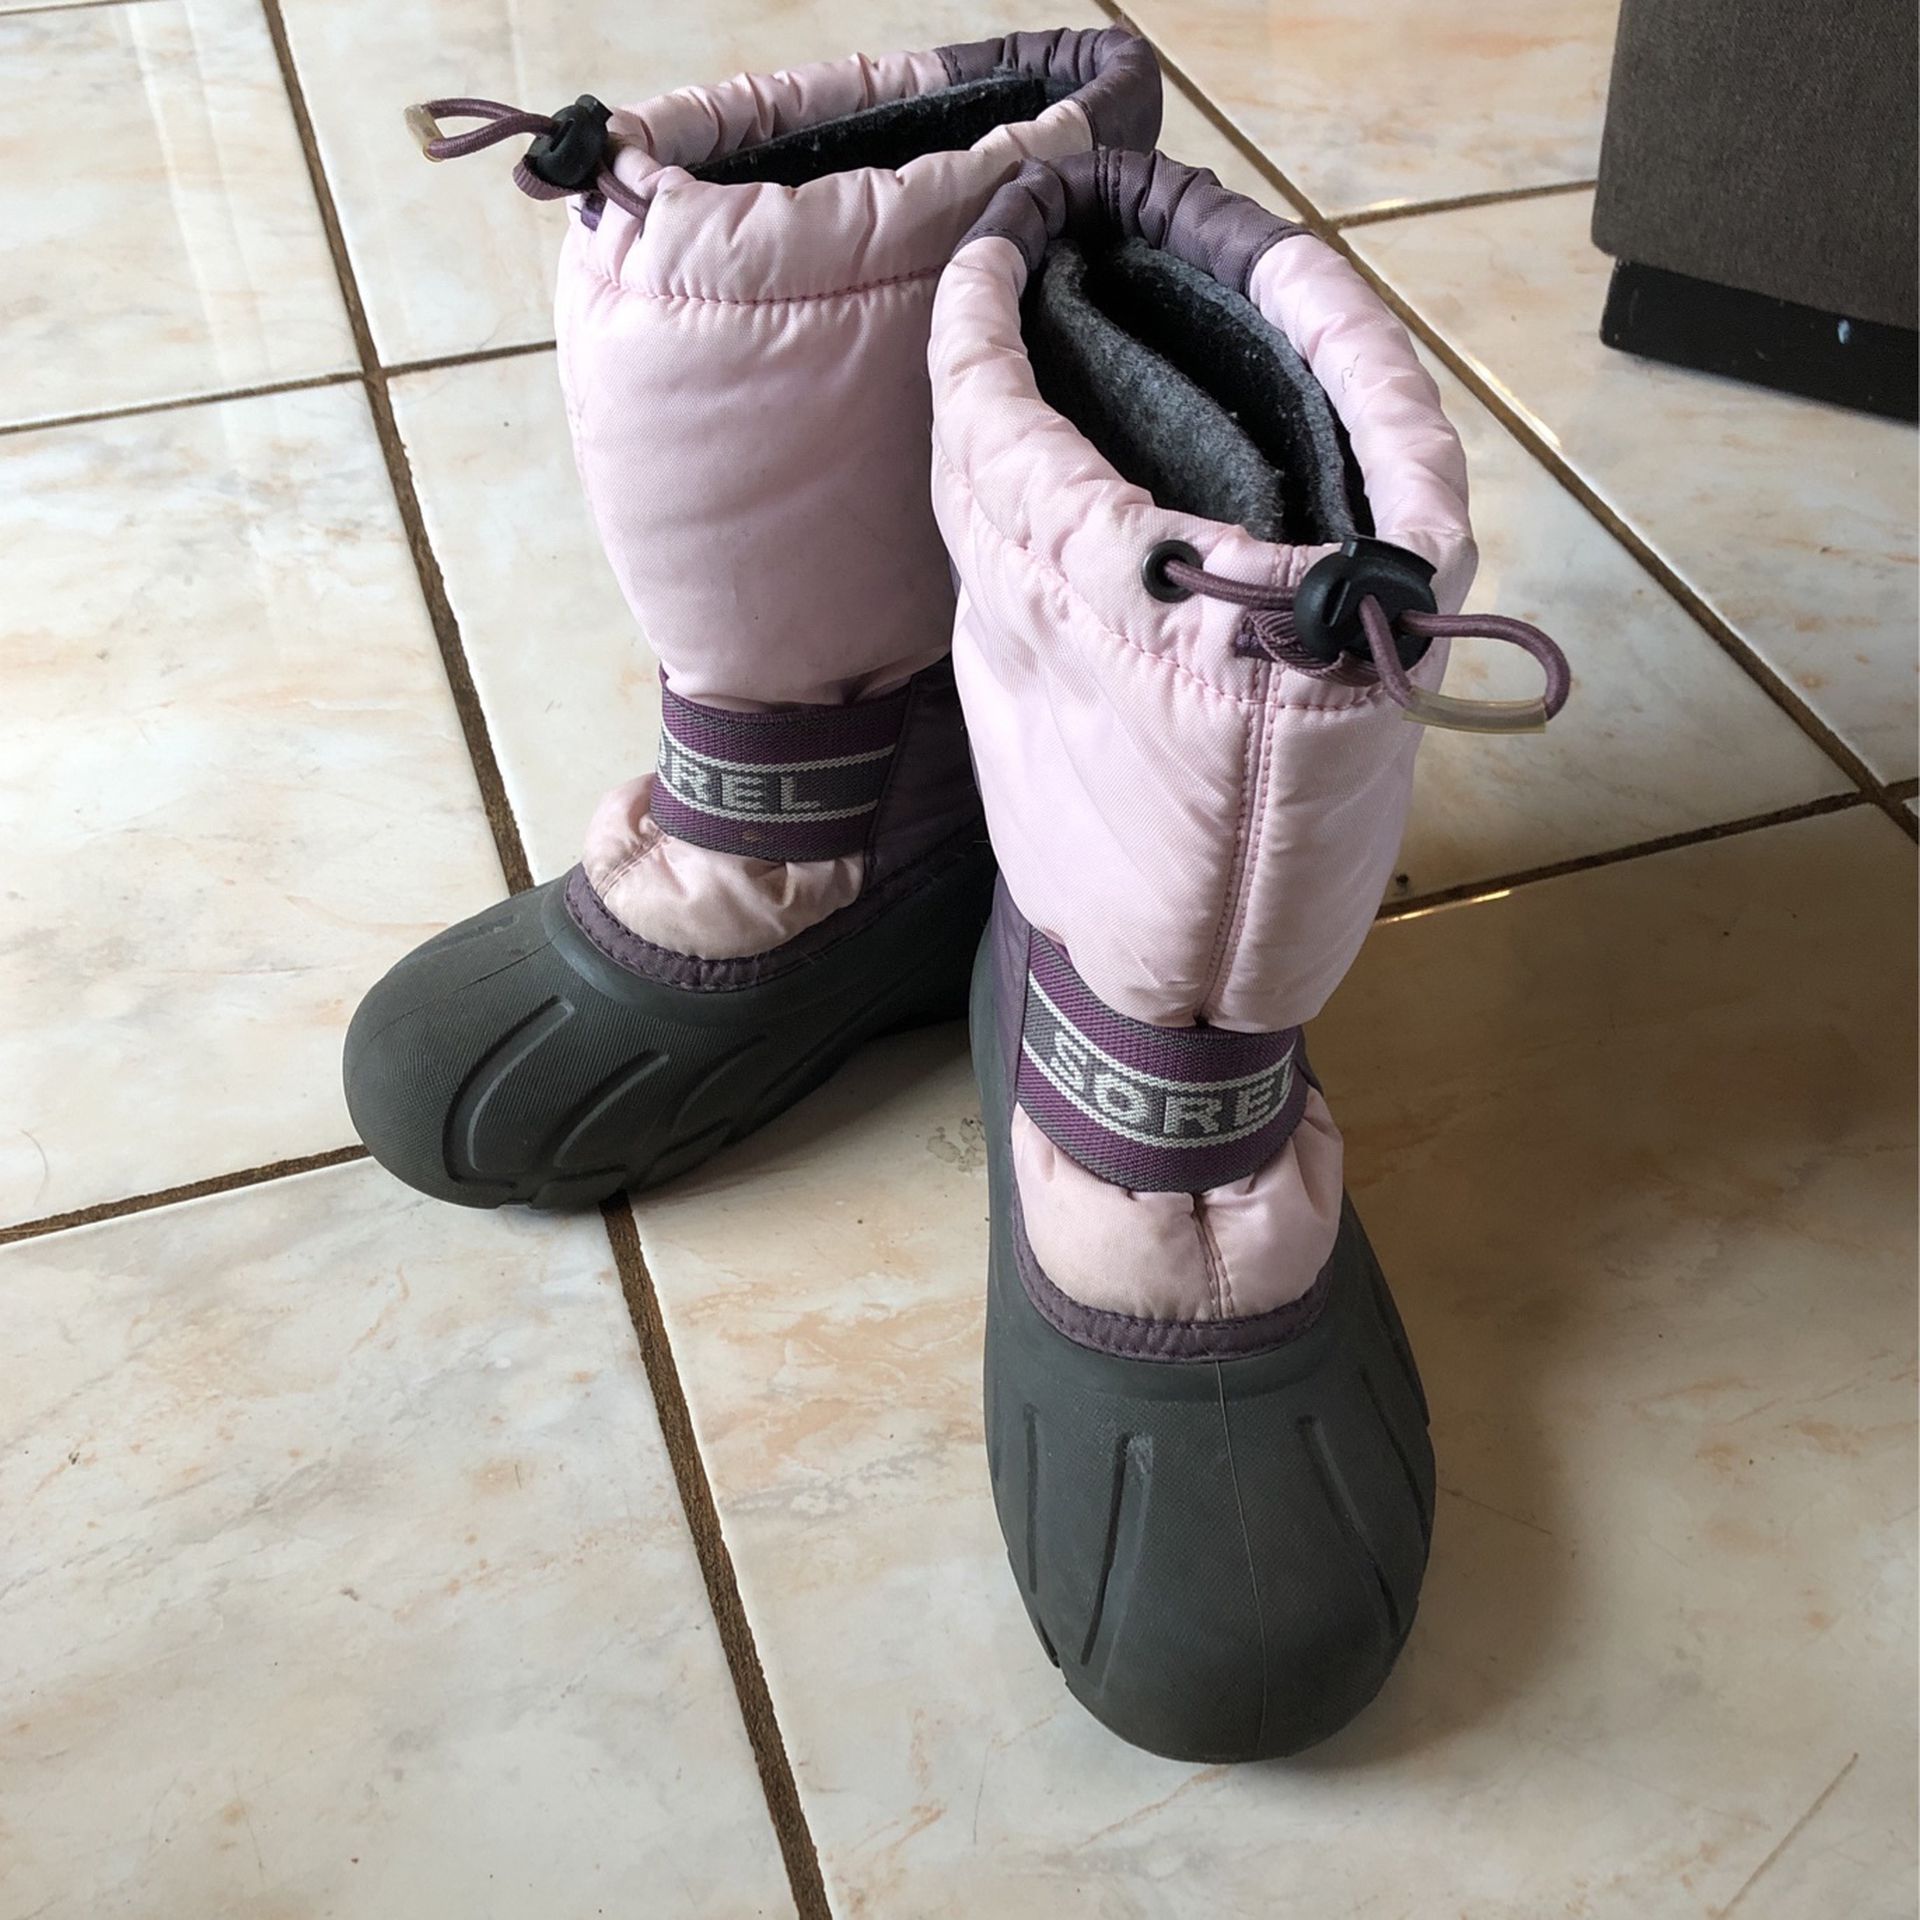 Sorel - Kids Winter/Snow Boots Size 1 Girl - Hardly Used - Good Condition